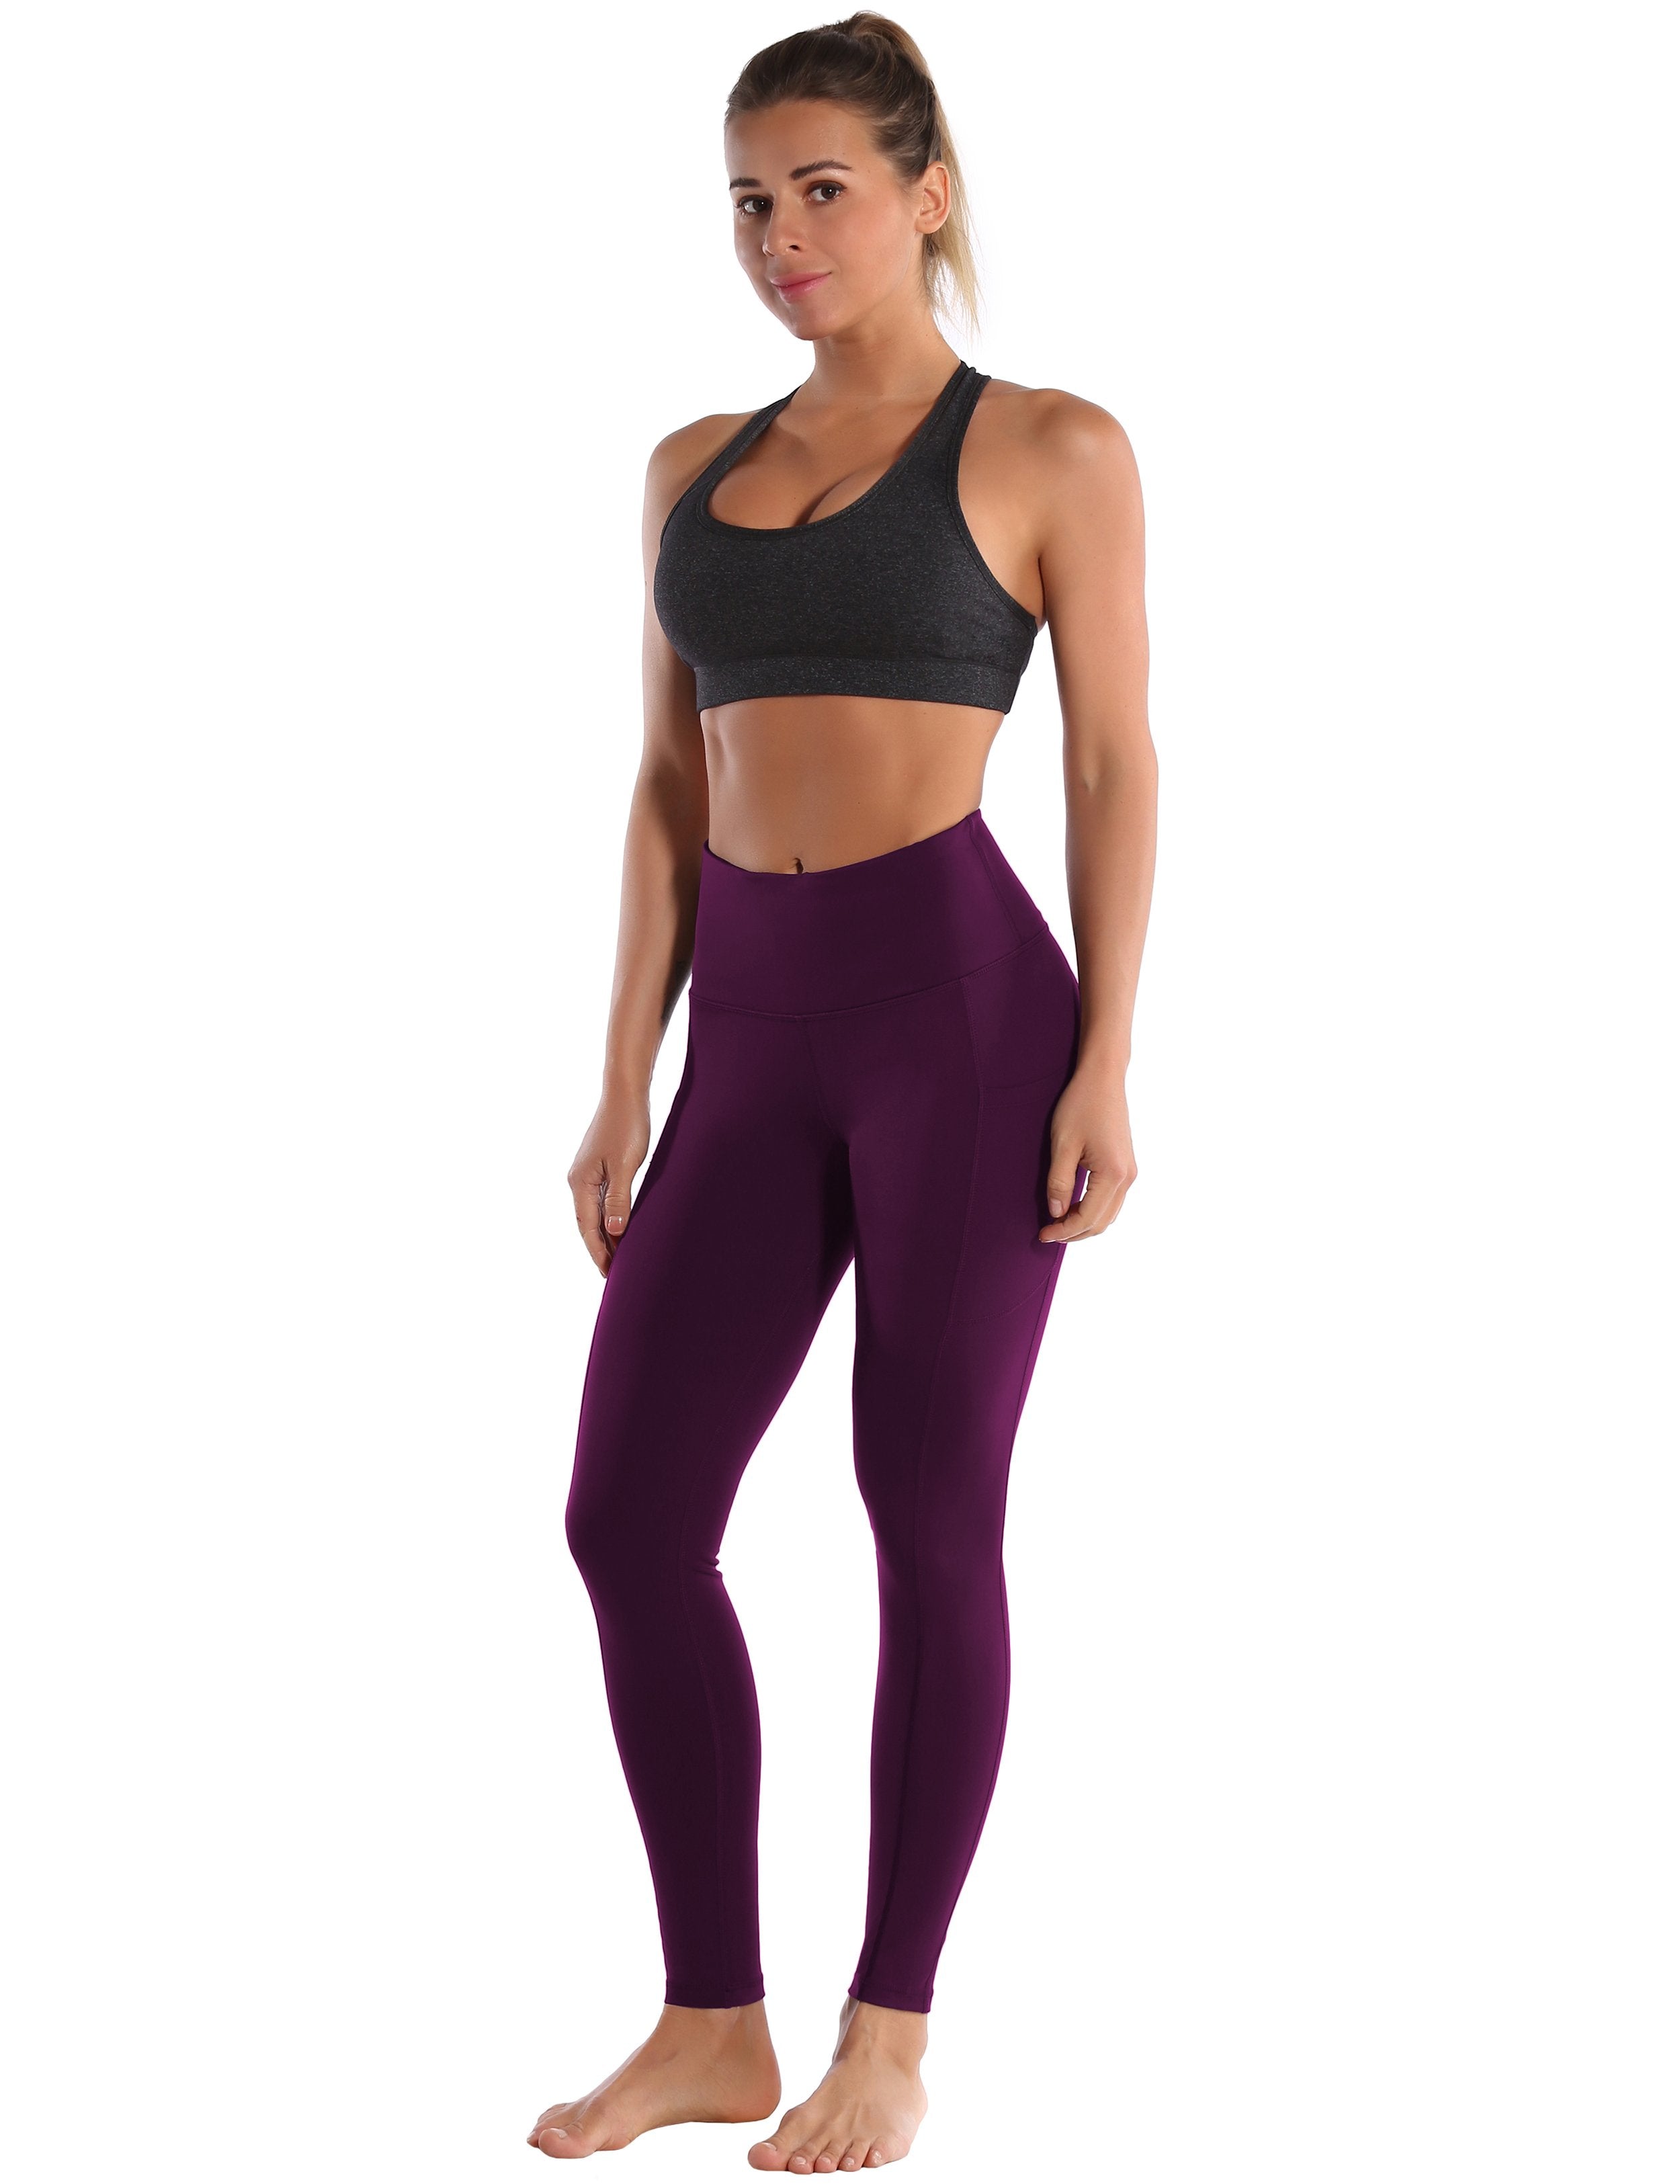 Hip Line Side Pockets Gym Pants grapevine Sexy Hip Line Side Pockets 75%Nylon/25%Spandex Fabric doesn't attract lint easily 4-way stretch No see-through Moisture-wicking Tummy control Inner pocket Two lengths